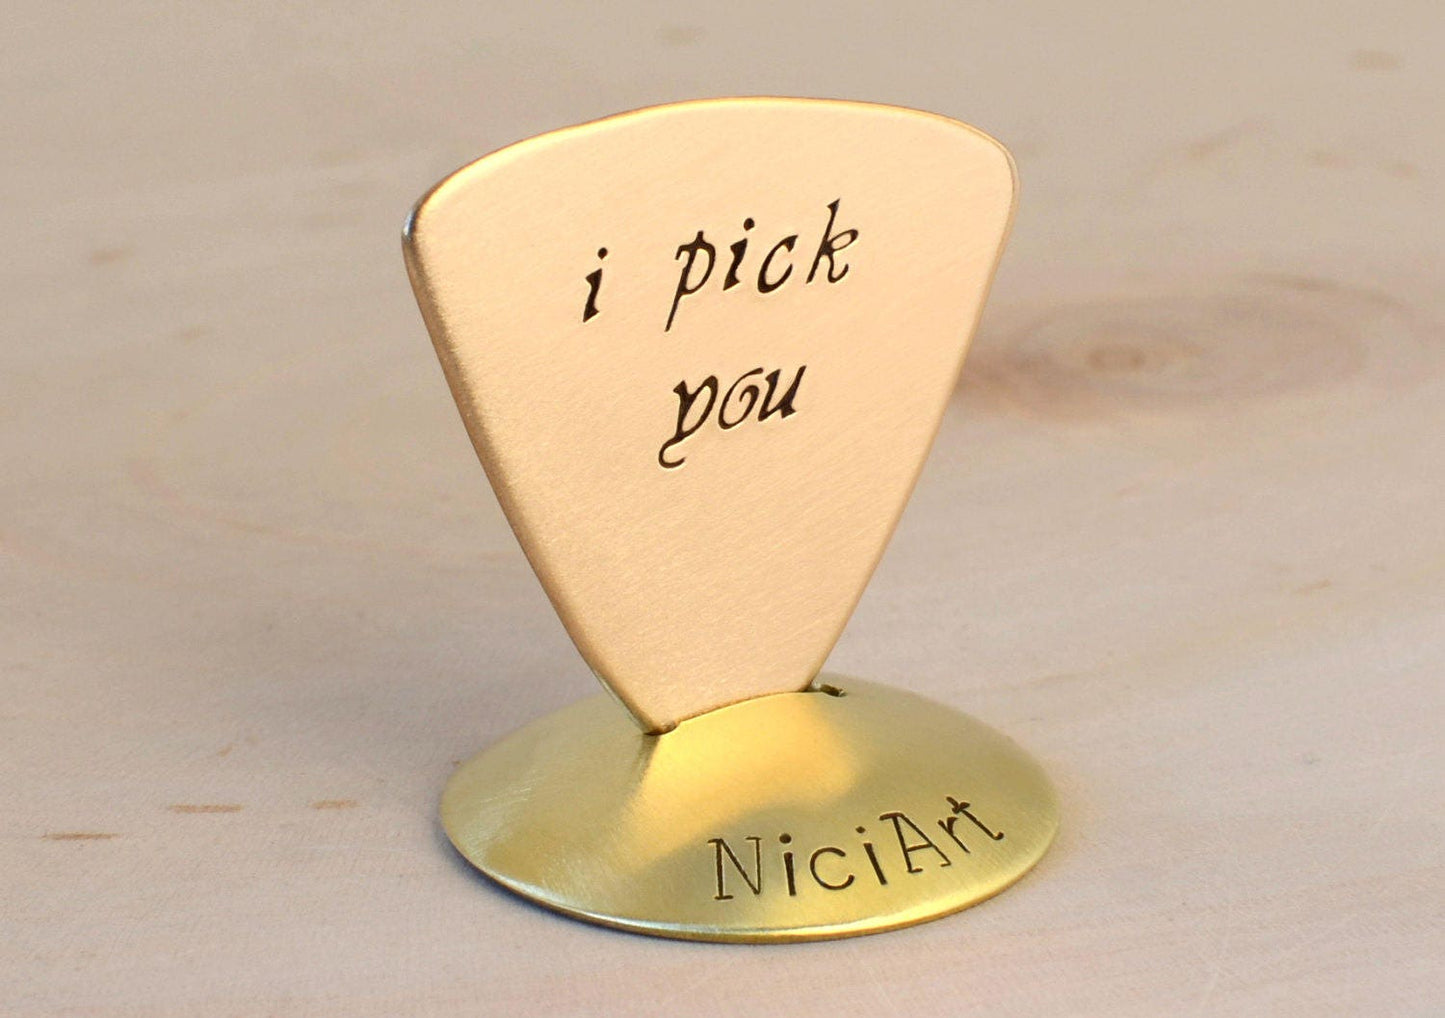 Triangular Bass Style Guitar Pick with classic I pick you